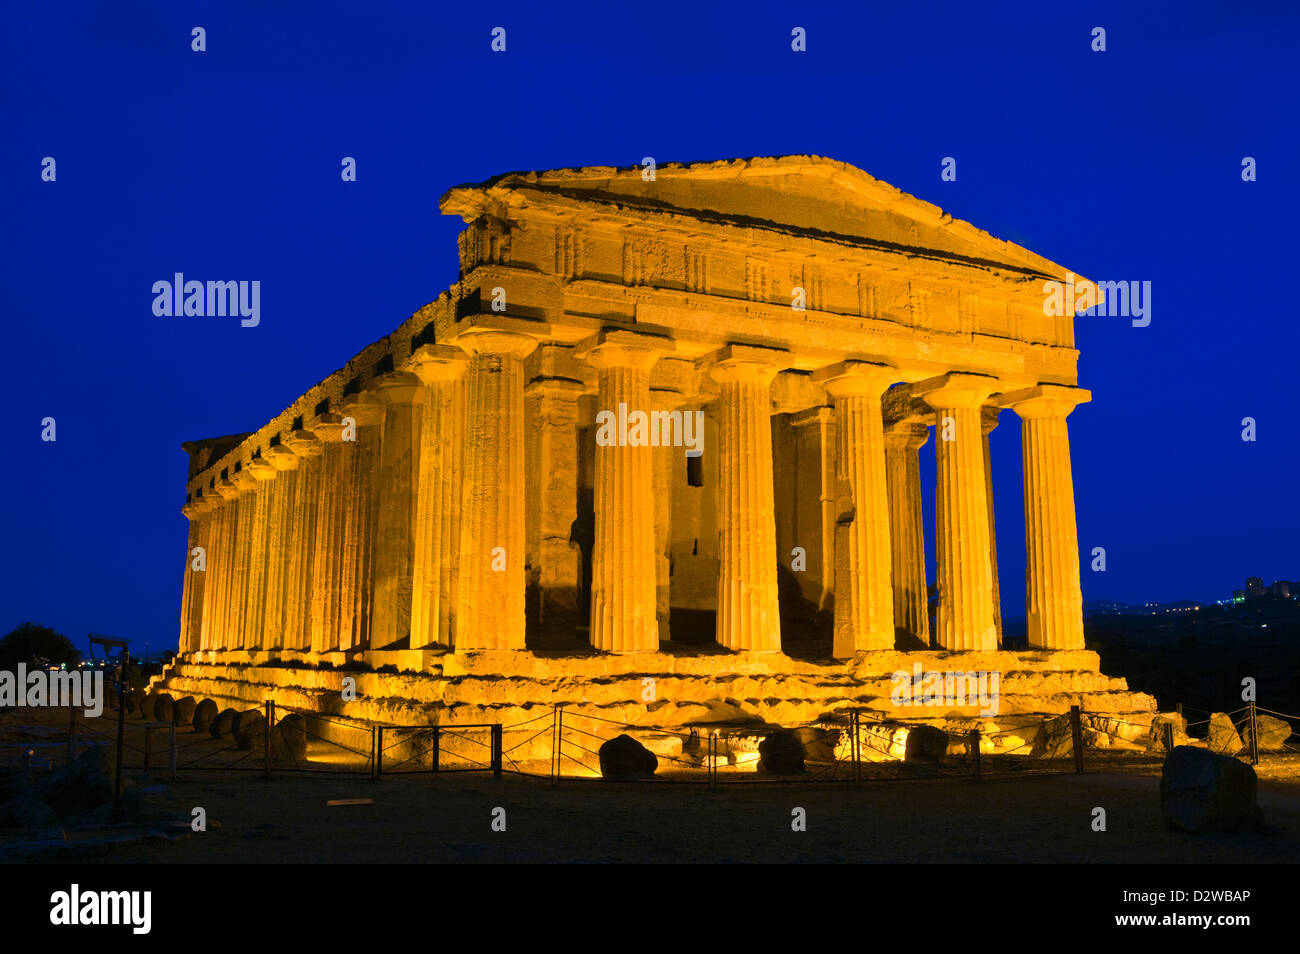 Temple of Concorde in the valley of the temples in Agrigento, Sicily, Italy. Stock Photo